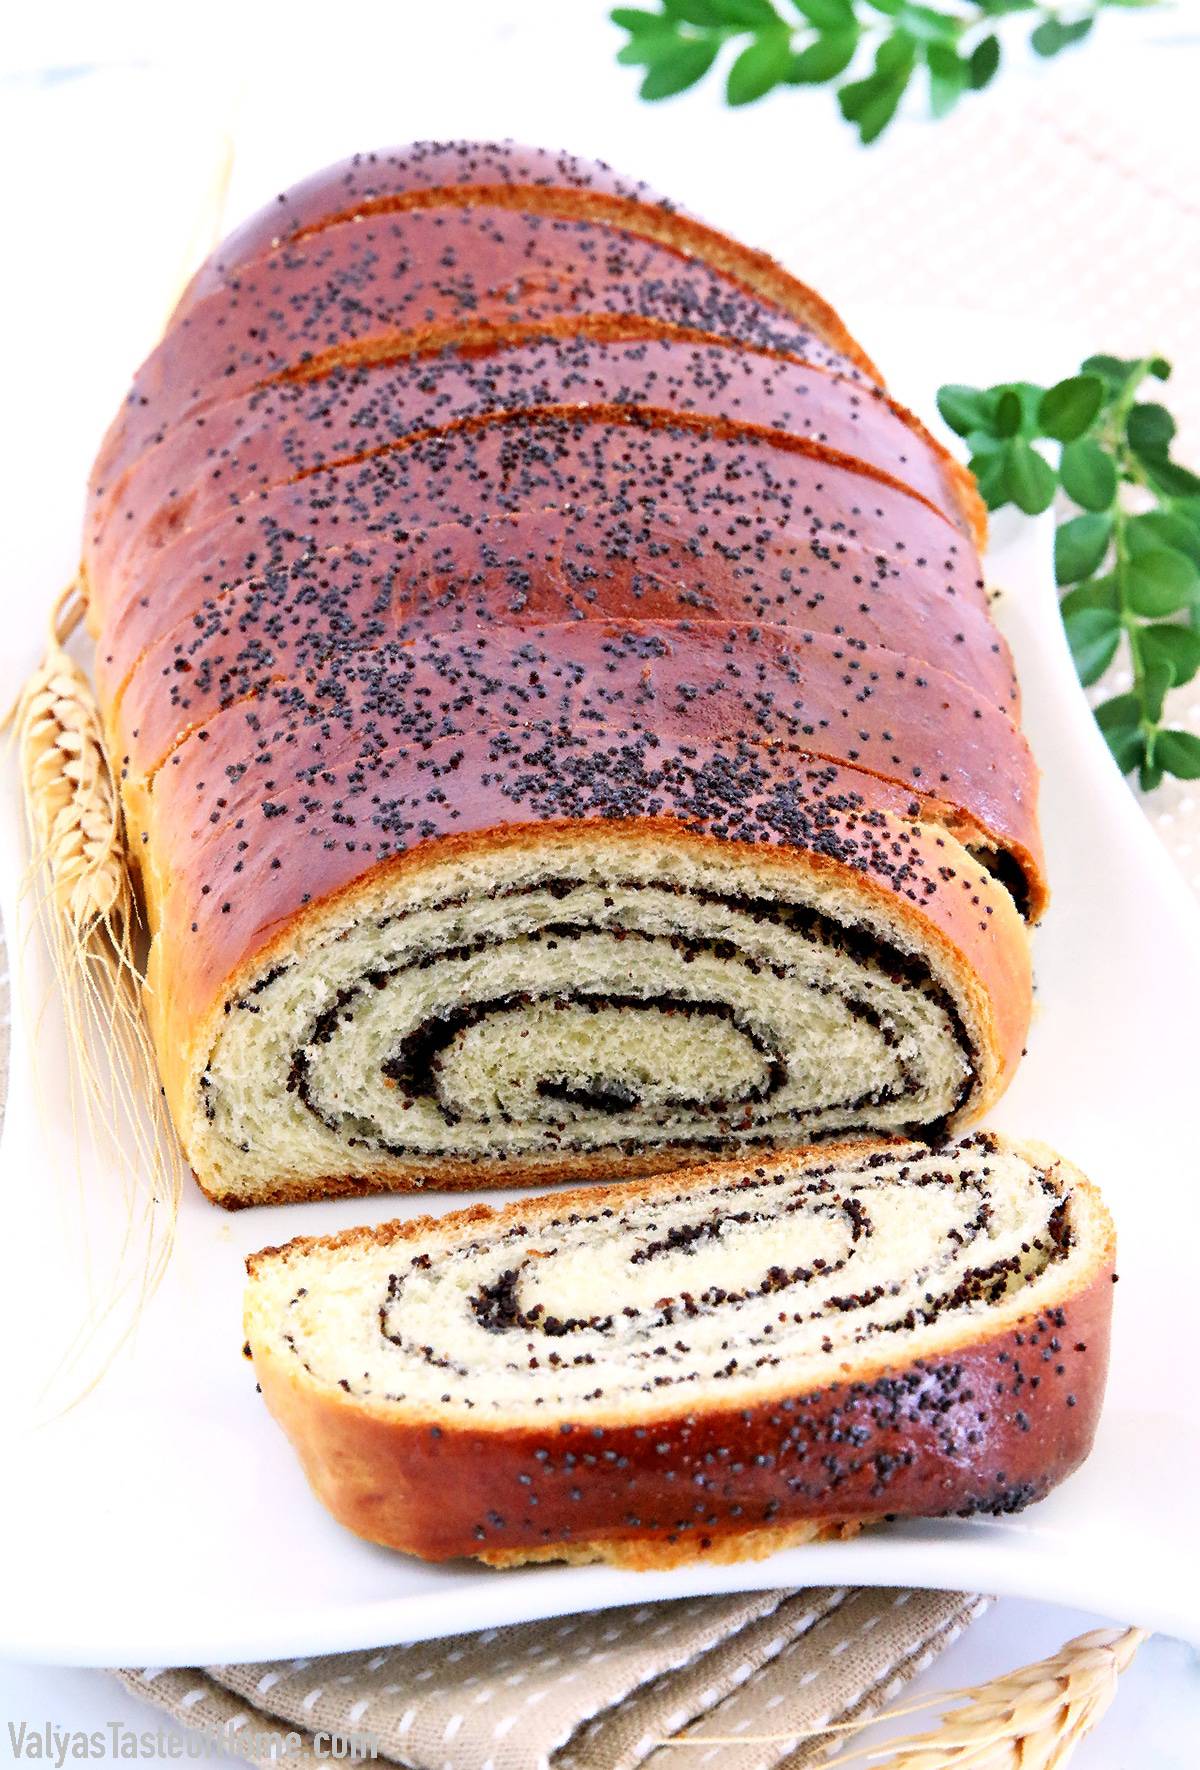 Finally, I'm sharing an age-old Easy Poppy Seed Roll Recipe that never gets old. This is a very special traditional recipe that has been handed down in my family for more years than I can even trace back. Pillow-soft, moist, and so flavorsome. Words even fail to describe how scrumptious it is.